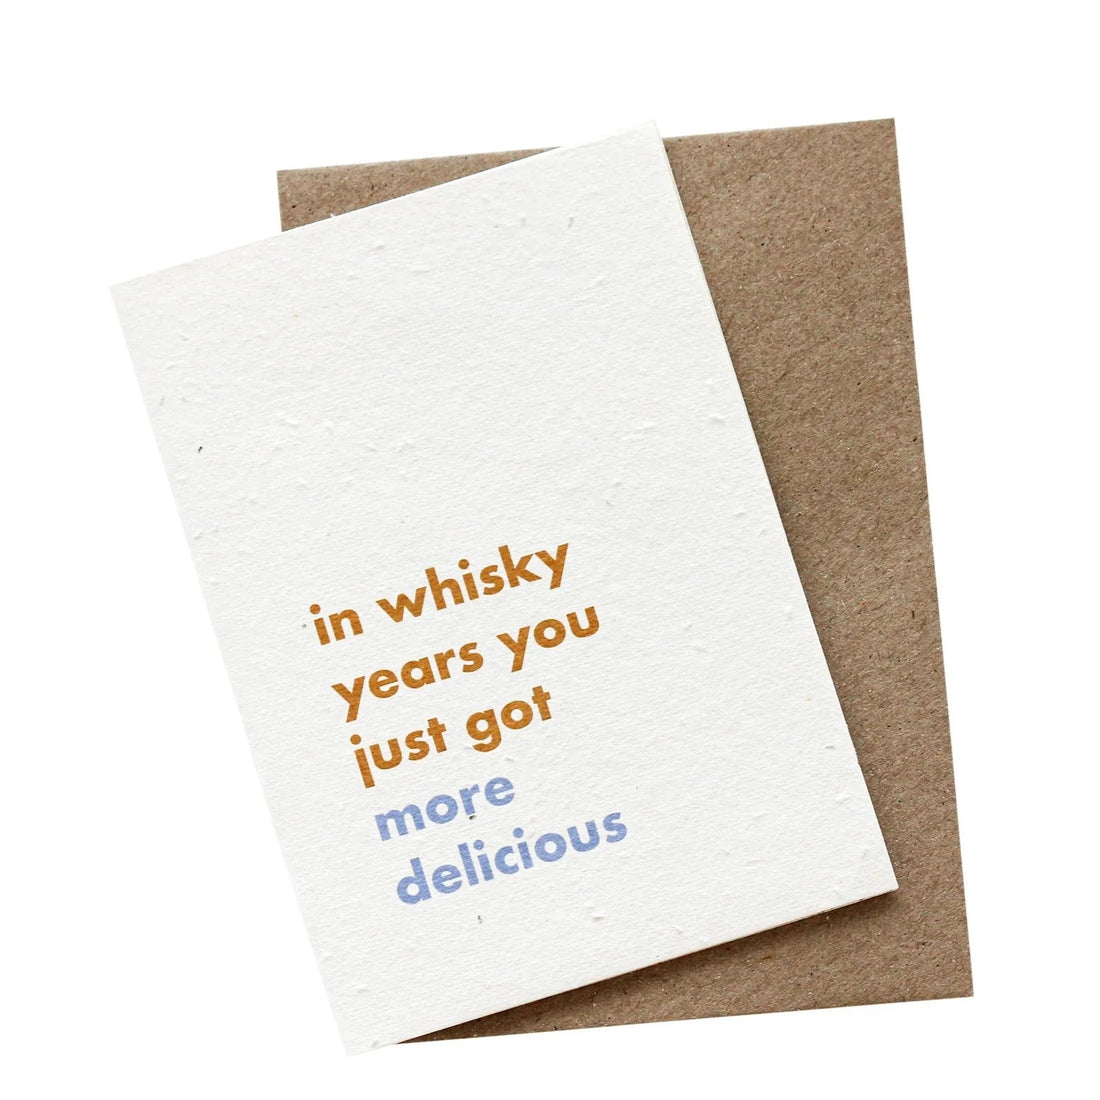 Seeded Plantable Greeting Card by Hello Petal - Whisky Years 